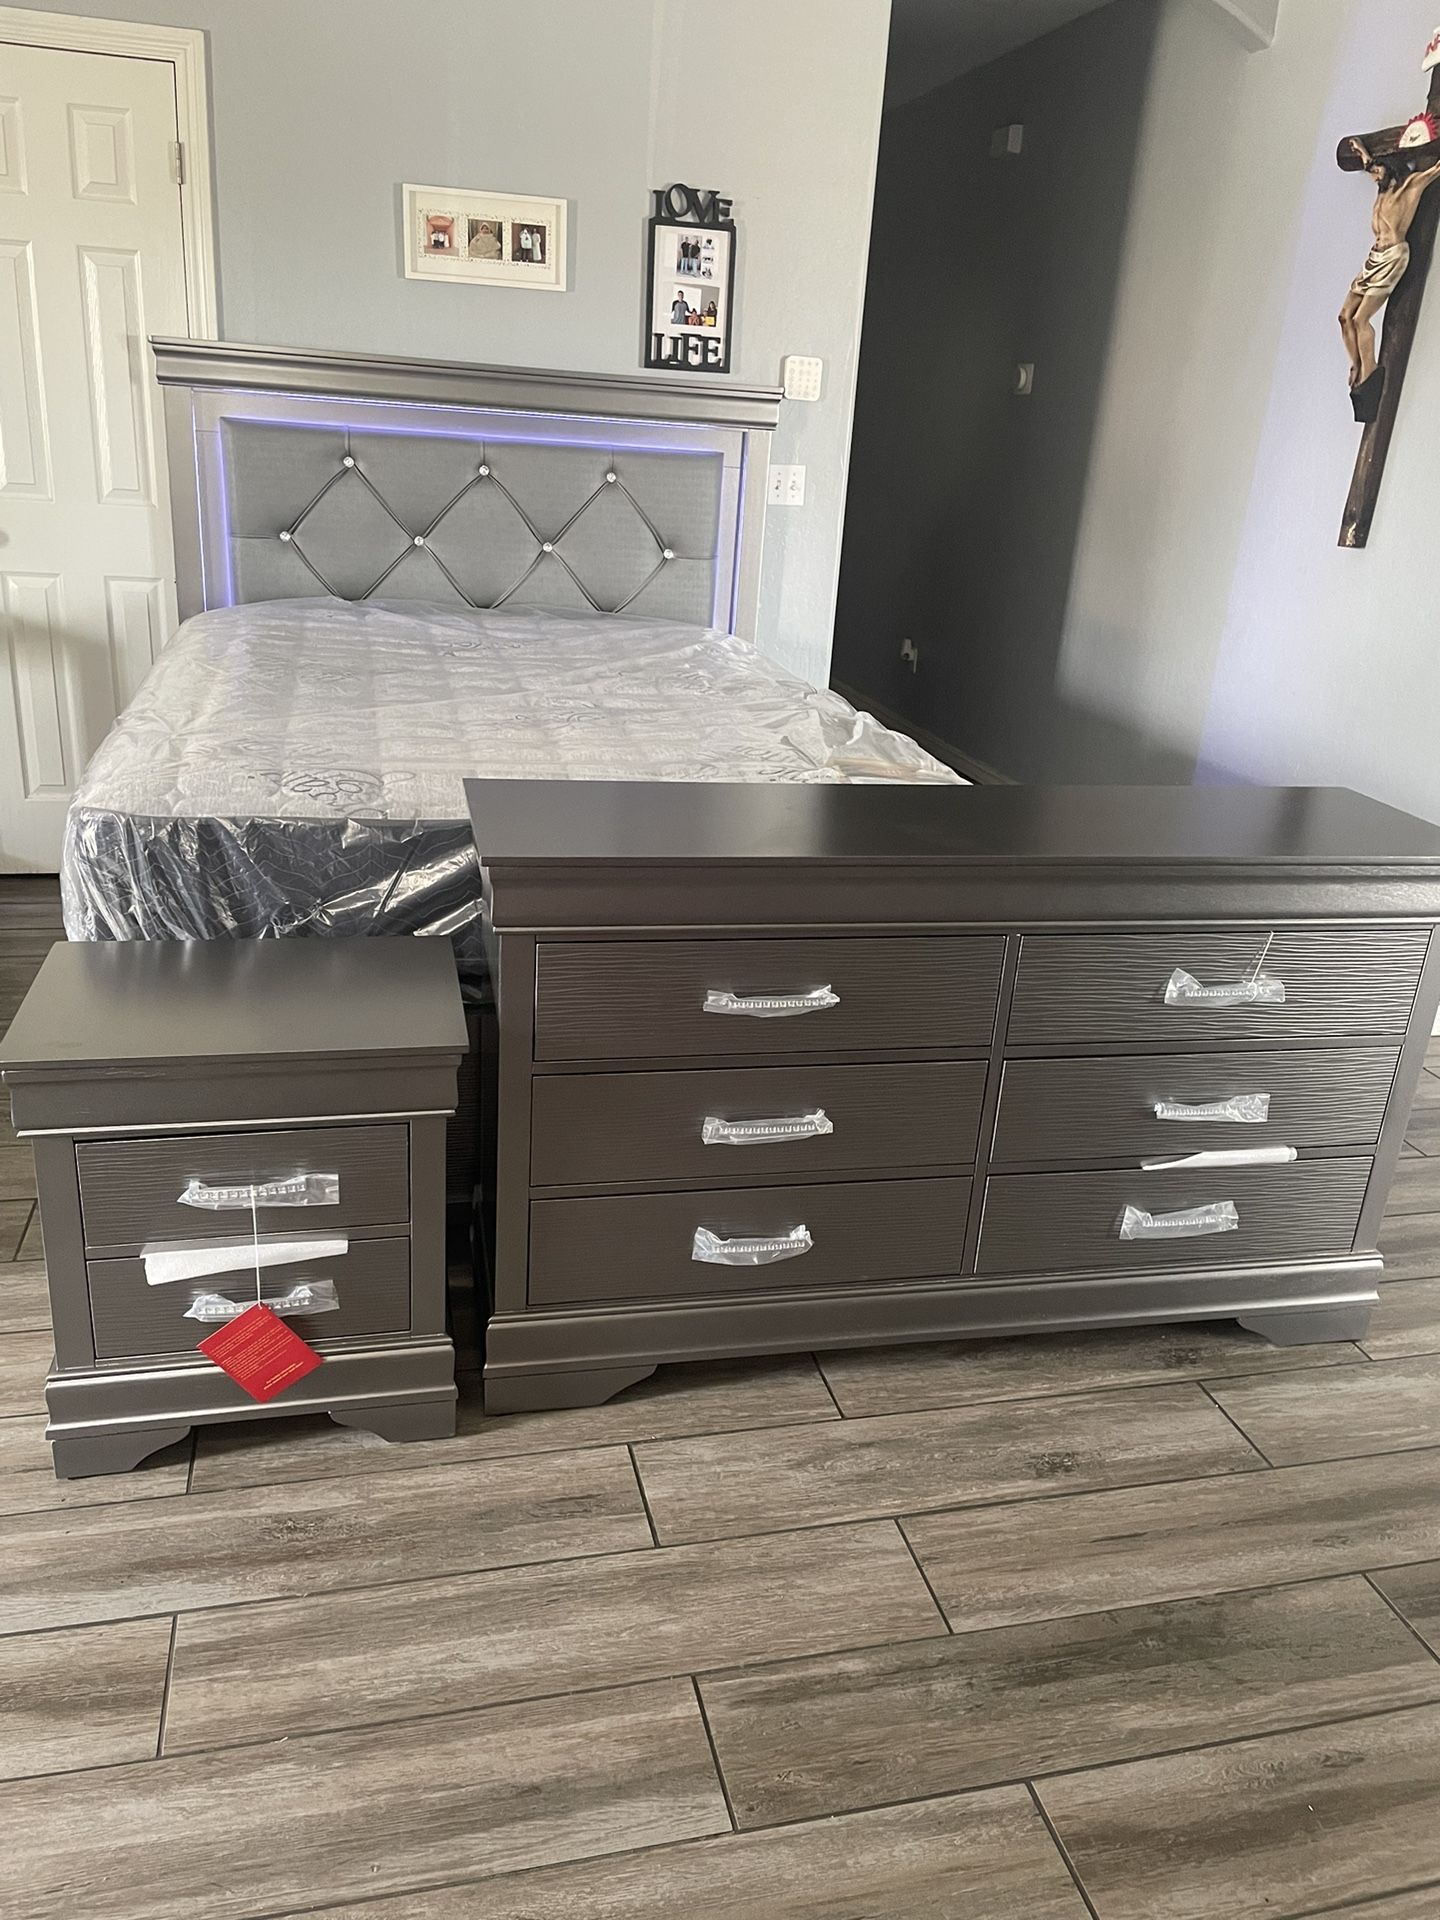 New Queen Bedroom Set With Mattresses Included! 